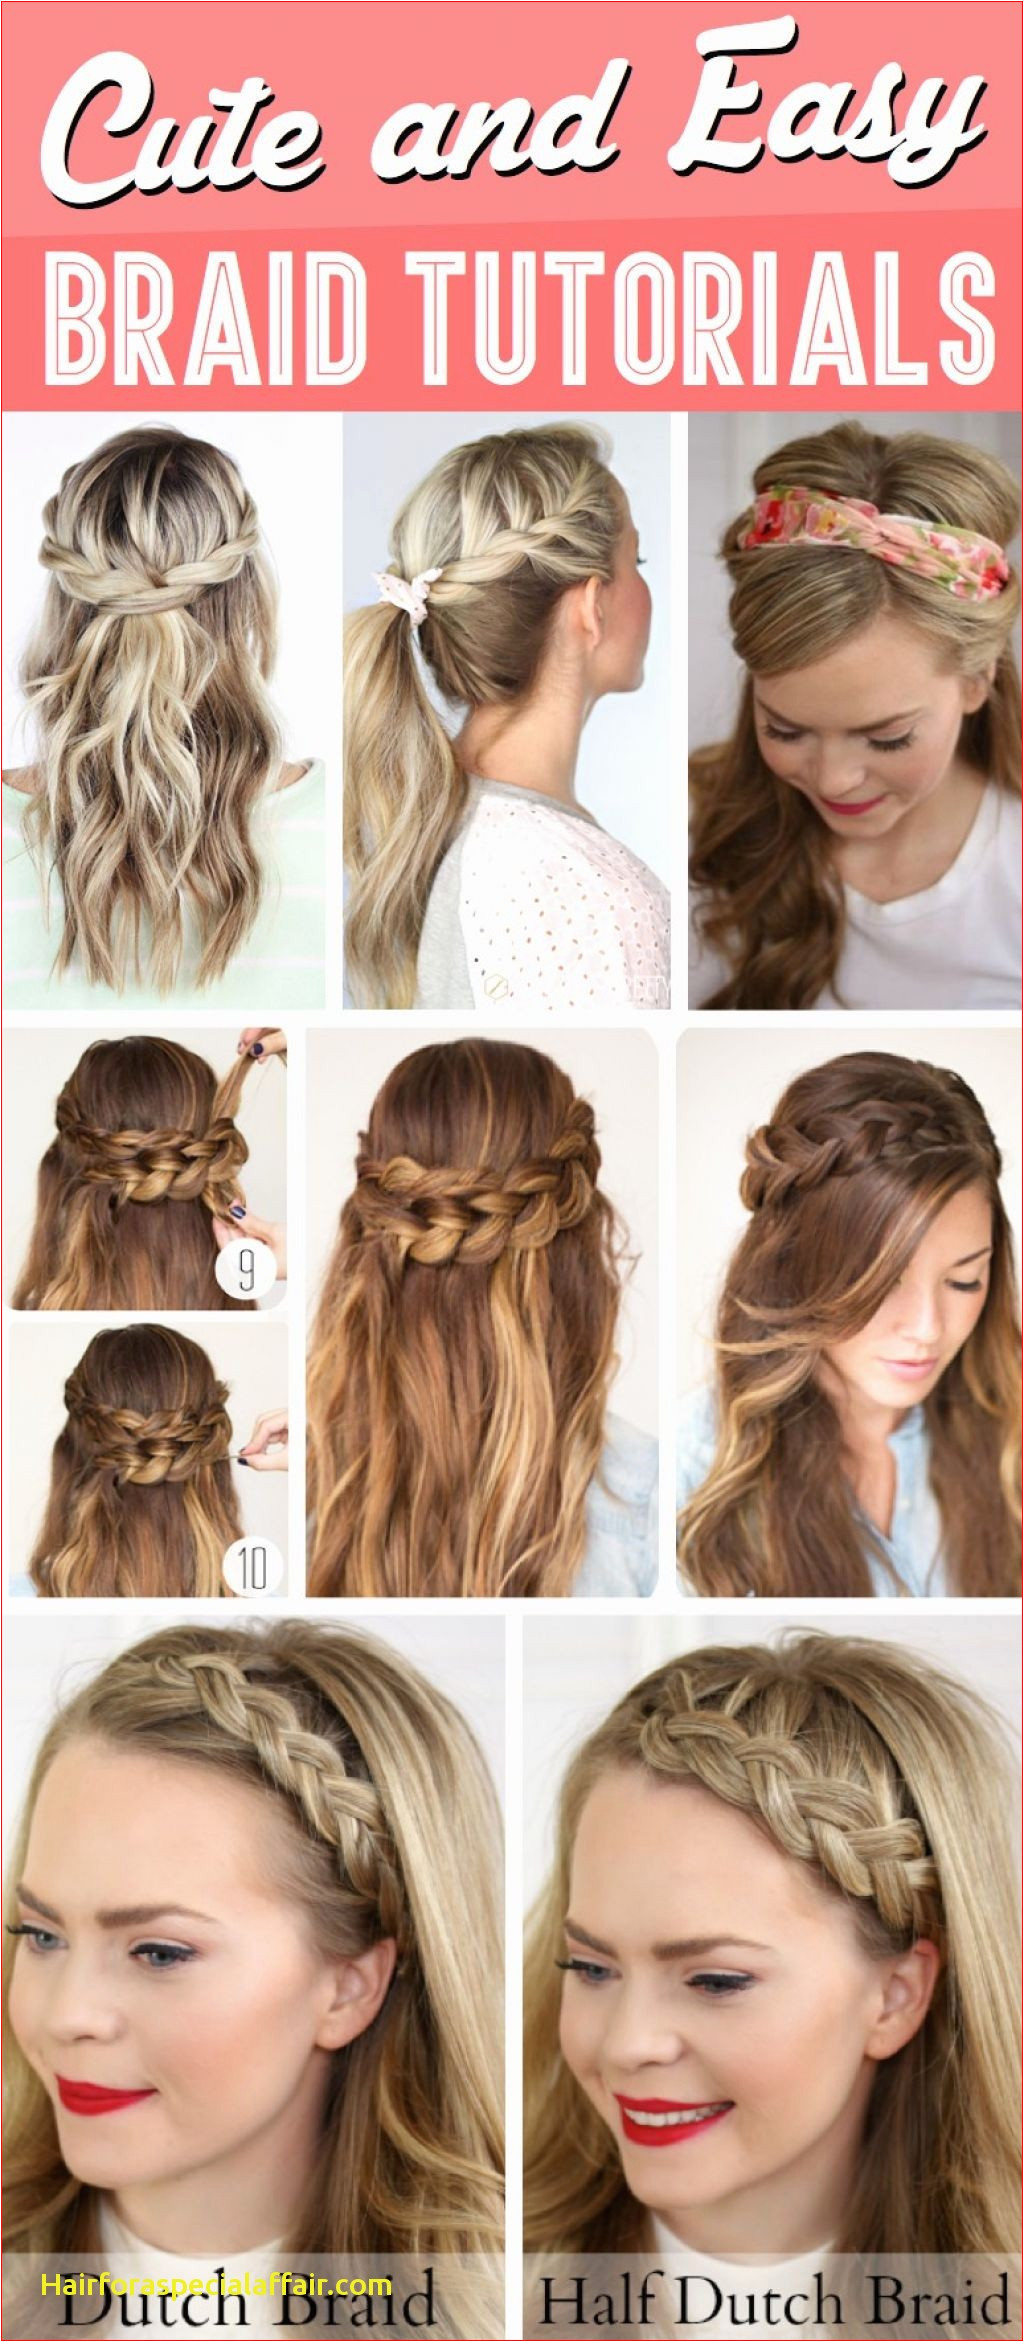 Really Cute Hairstyles for Long Hair for School Best Cute and Easy Hairstyles for School